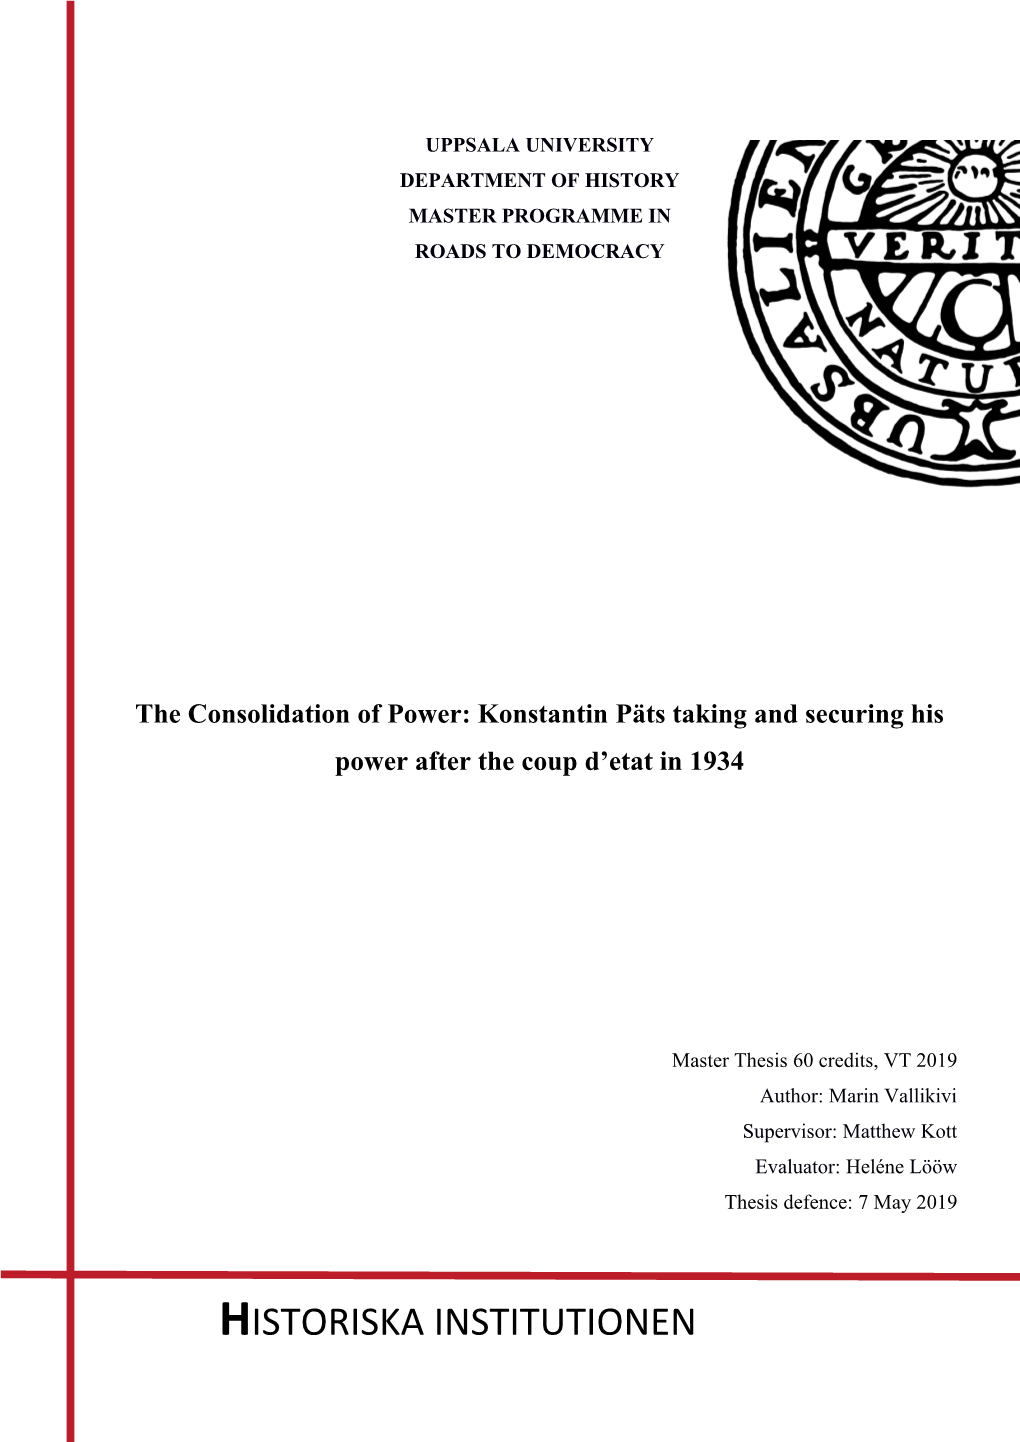 The Consolidation of Power: Konstantin Päts Taking and Securing His Power After the Coup D’Etat in 1934